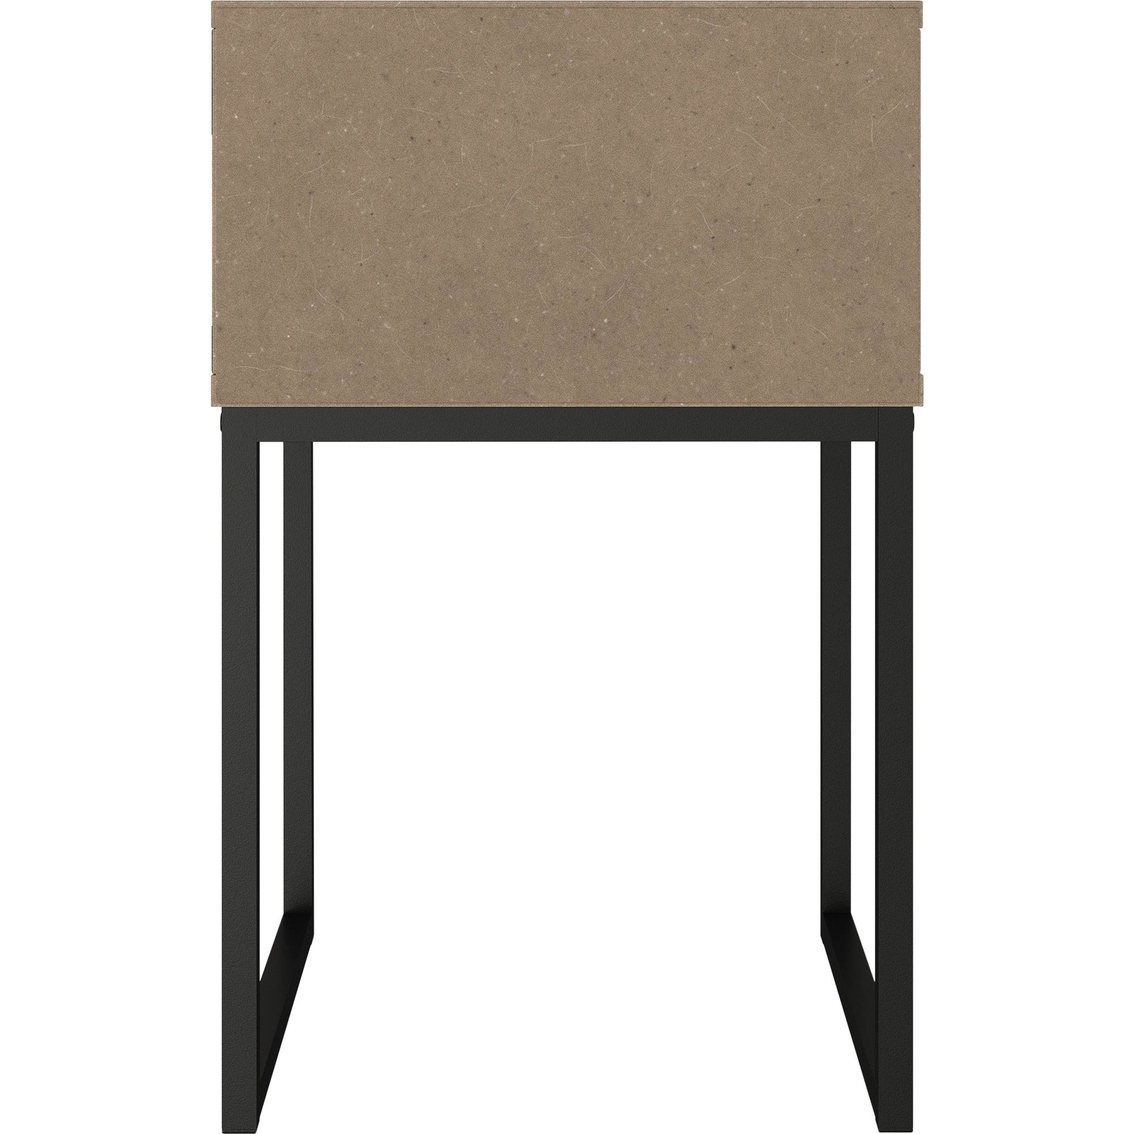 Signature Design by Ashley Ready to Assemble Neilsville Nightstand - Image 4 of 7